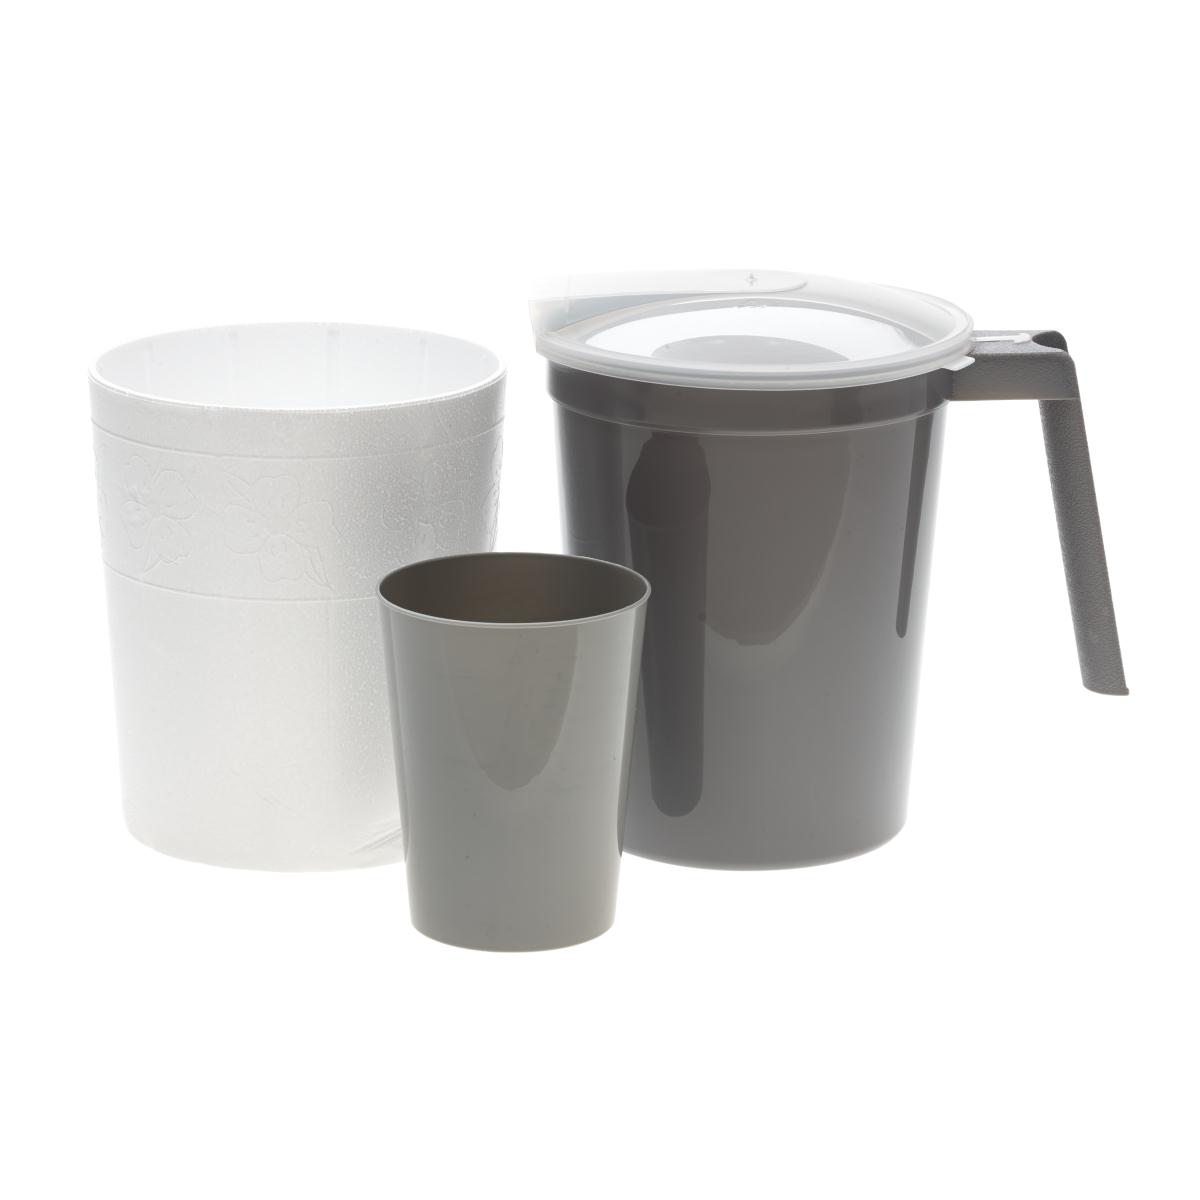 Water Pitcher and Tumbler Set with Foam Outer Jacket,Graphite,32.000 OZ Case of 40